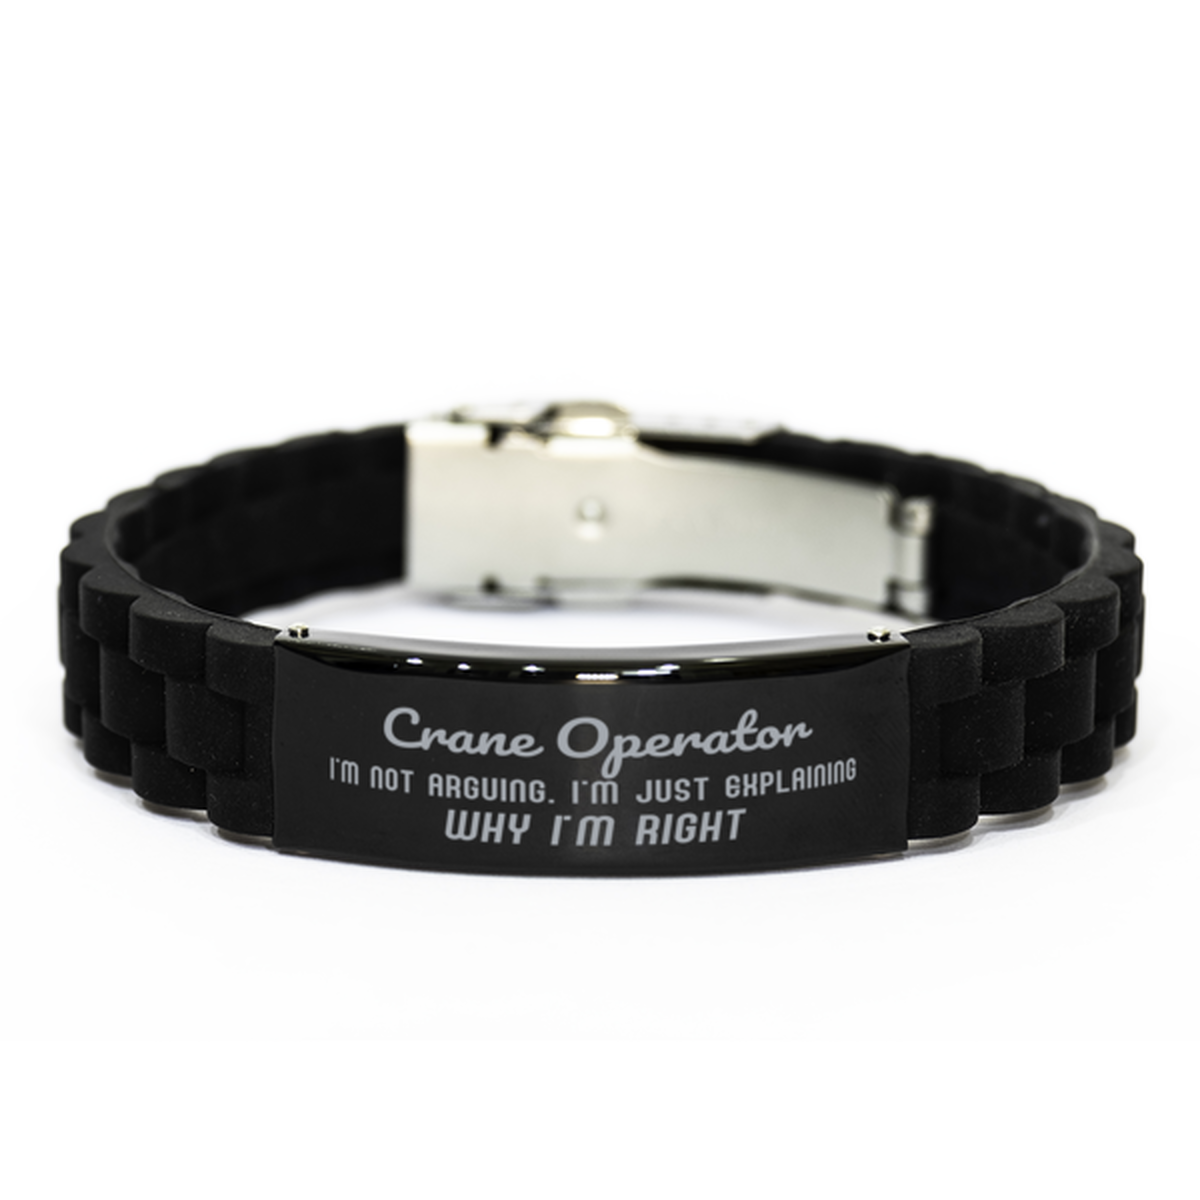 Crane Operator I'm not Arguing. I'm Just Explaining Why I'm RIGHT Black Glidelock Clasp Bracelet, Funny Saying Quote Crane Operator Gifts For Crane Operator Graduation Birthday Christmas Gifts for Men Women Coworker